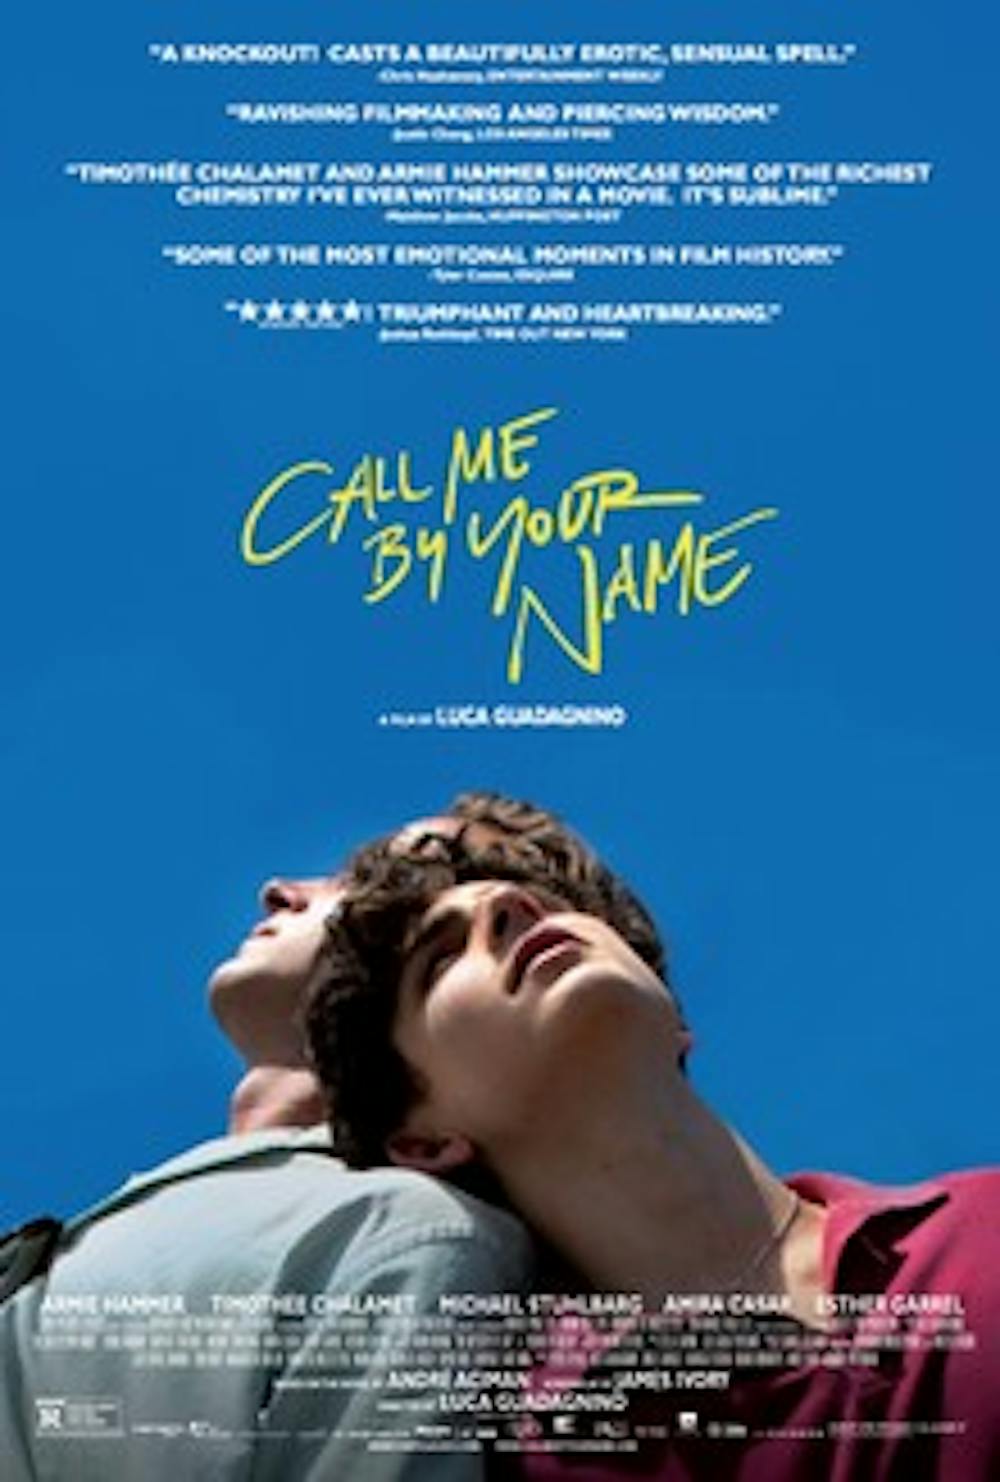 "Call Me By Your Name" is a beautifully shot, heartbreaking but well-acted love story that completely lives up to its hype.